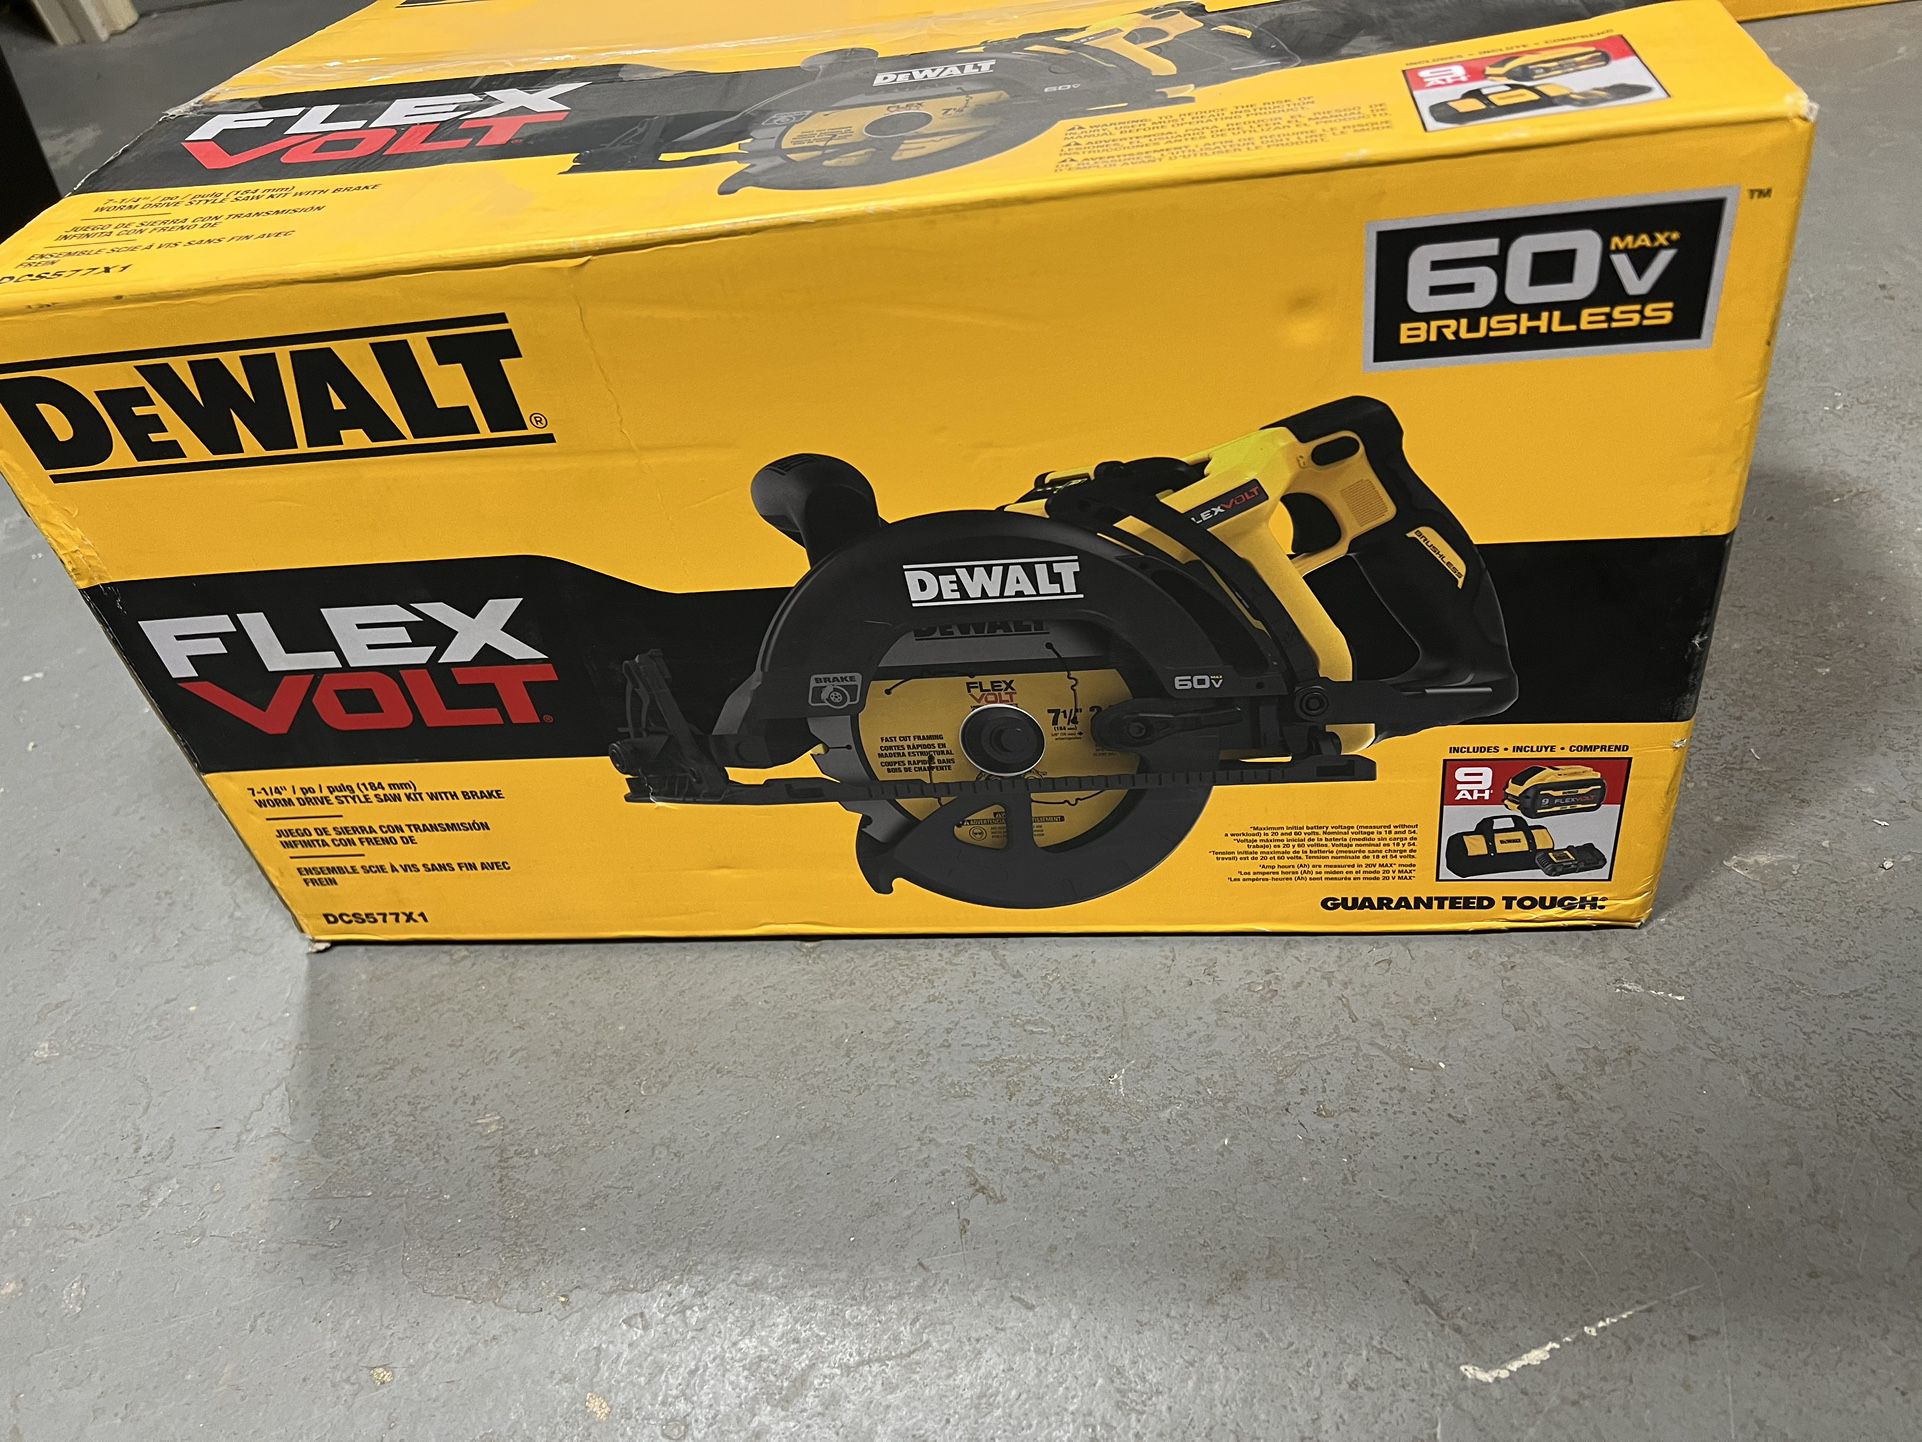 DEWALT FLEXVOLT 60V MAX 7-1/4 in. Cordless Worm Drive Style Saw with Battery - Brand New